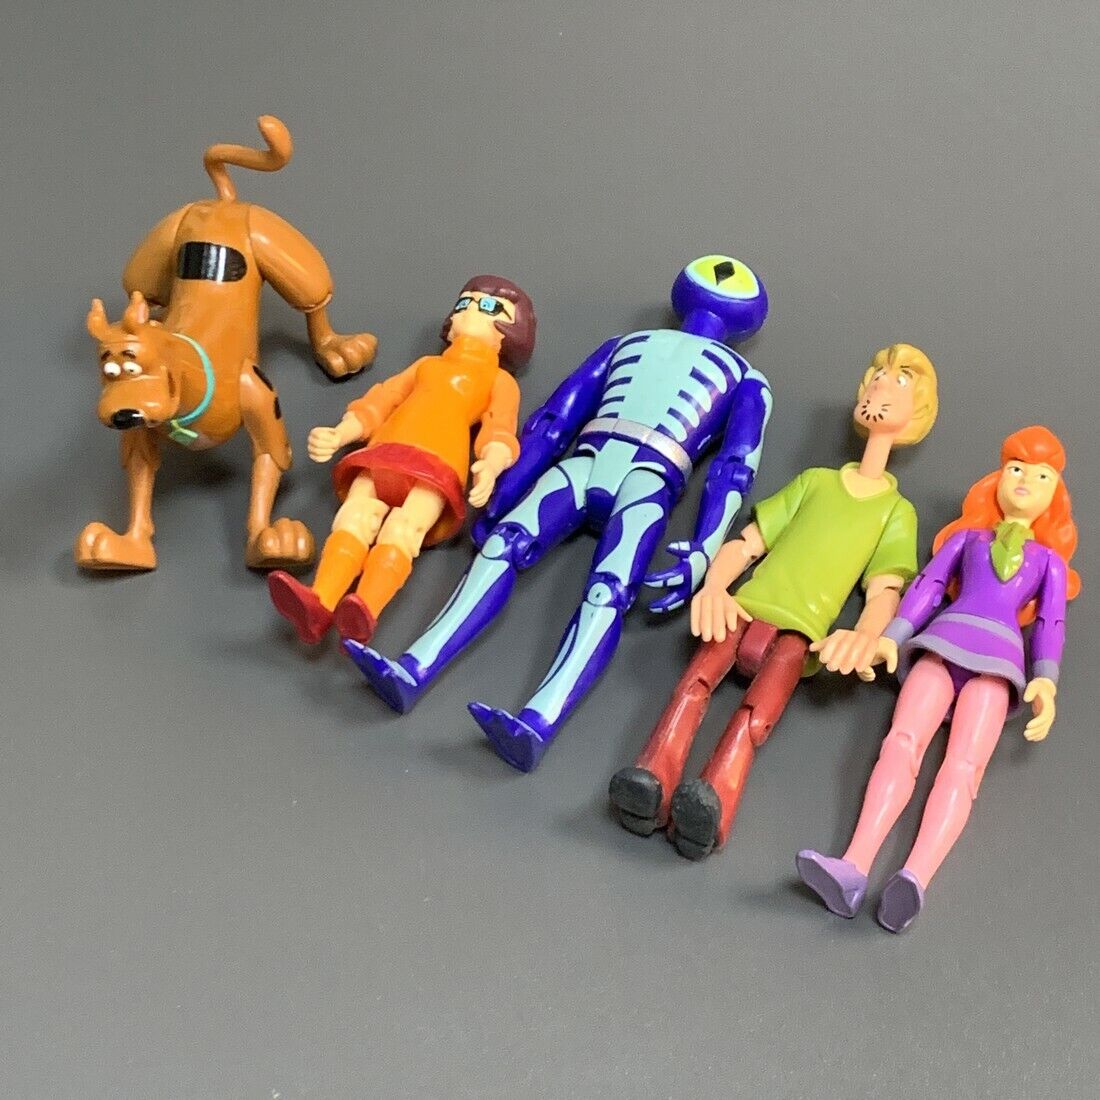 Rare Lot 5 Scooby-Doo Velma Shaggy Daphne Dog 5\'\' Action Figures toys Gifts FRED